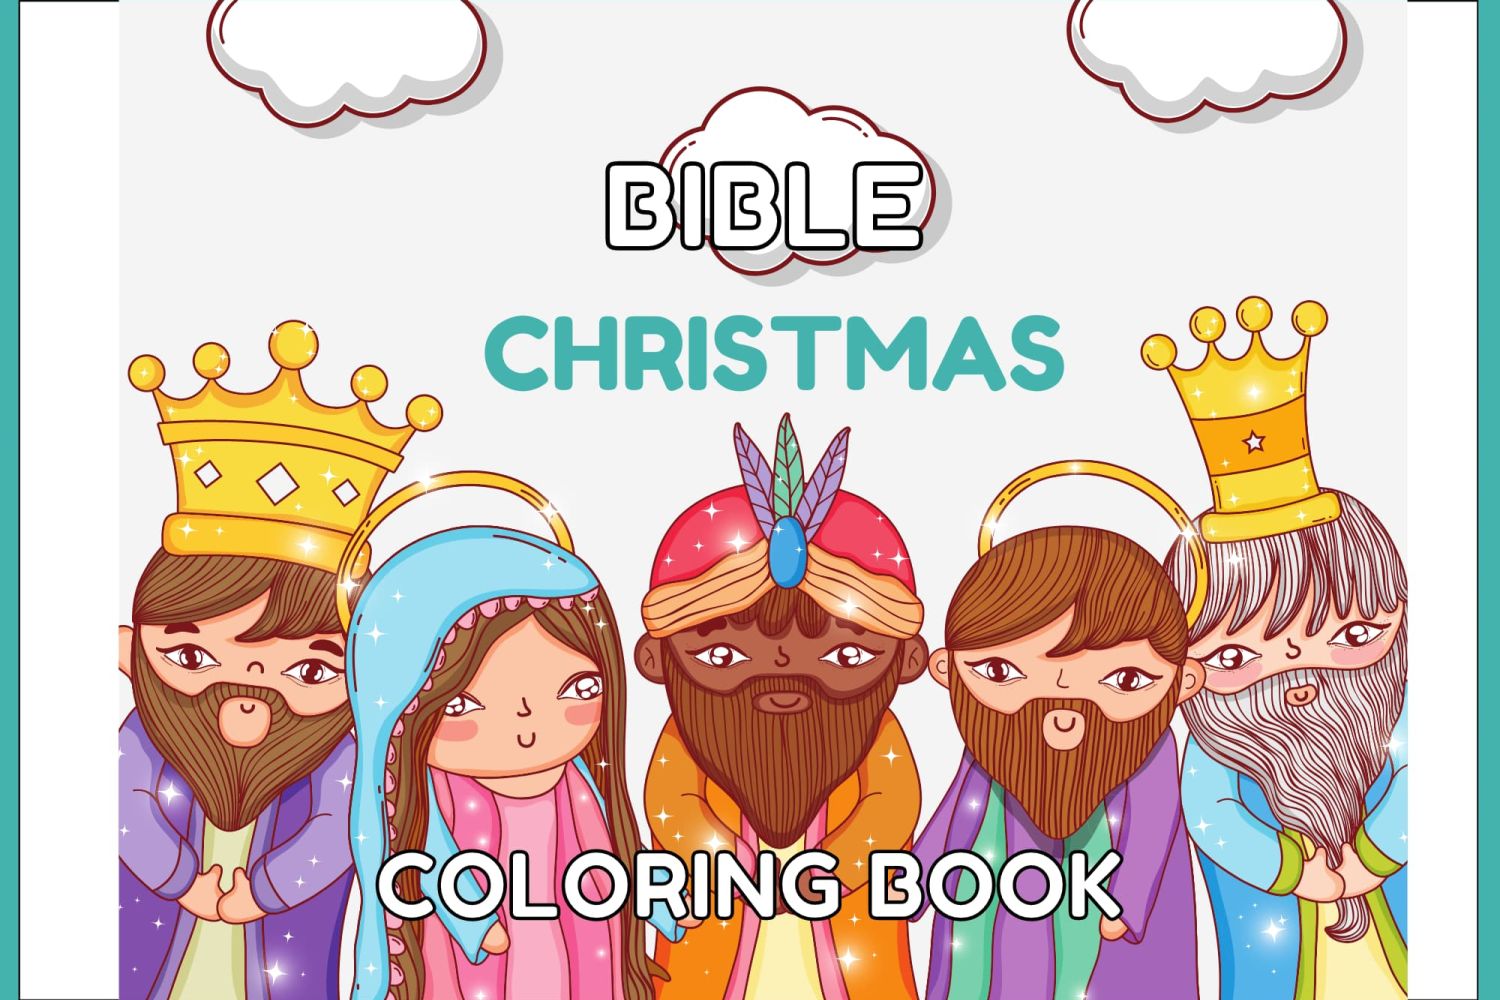 Craft%20-%20Christmas%20-%20Christmas%20story%20colouring%20book-45005b5a Mary (mother of Jesus)